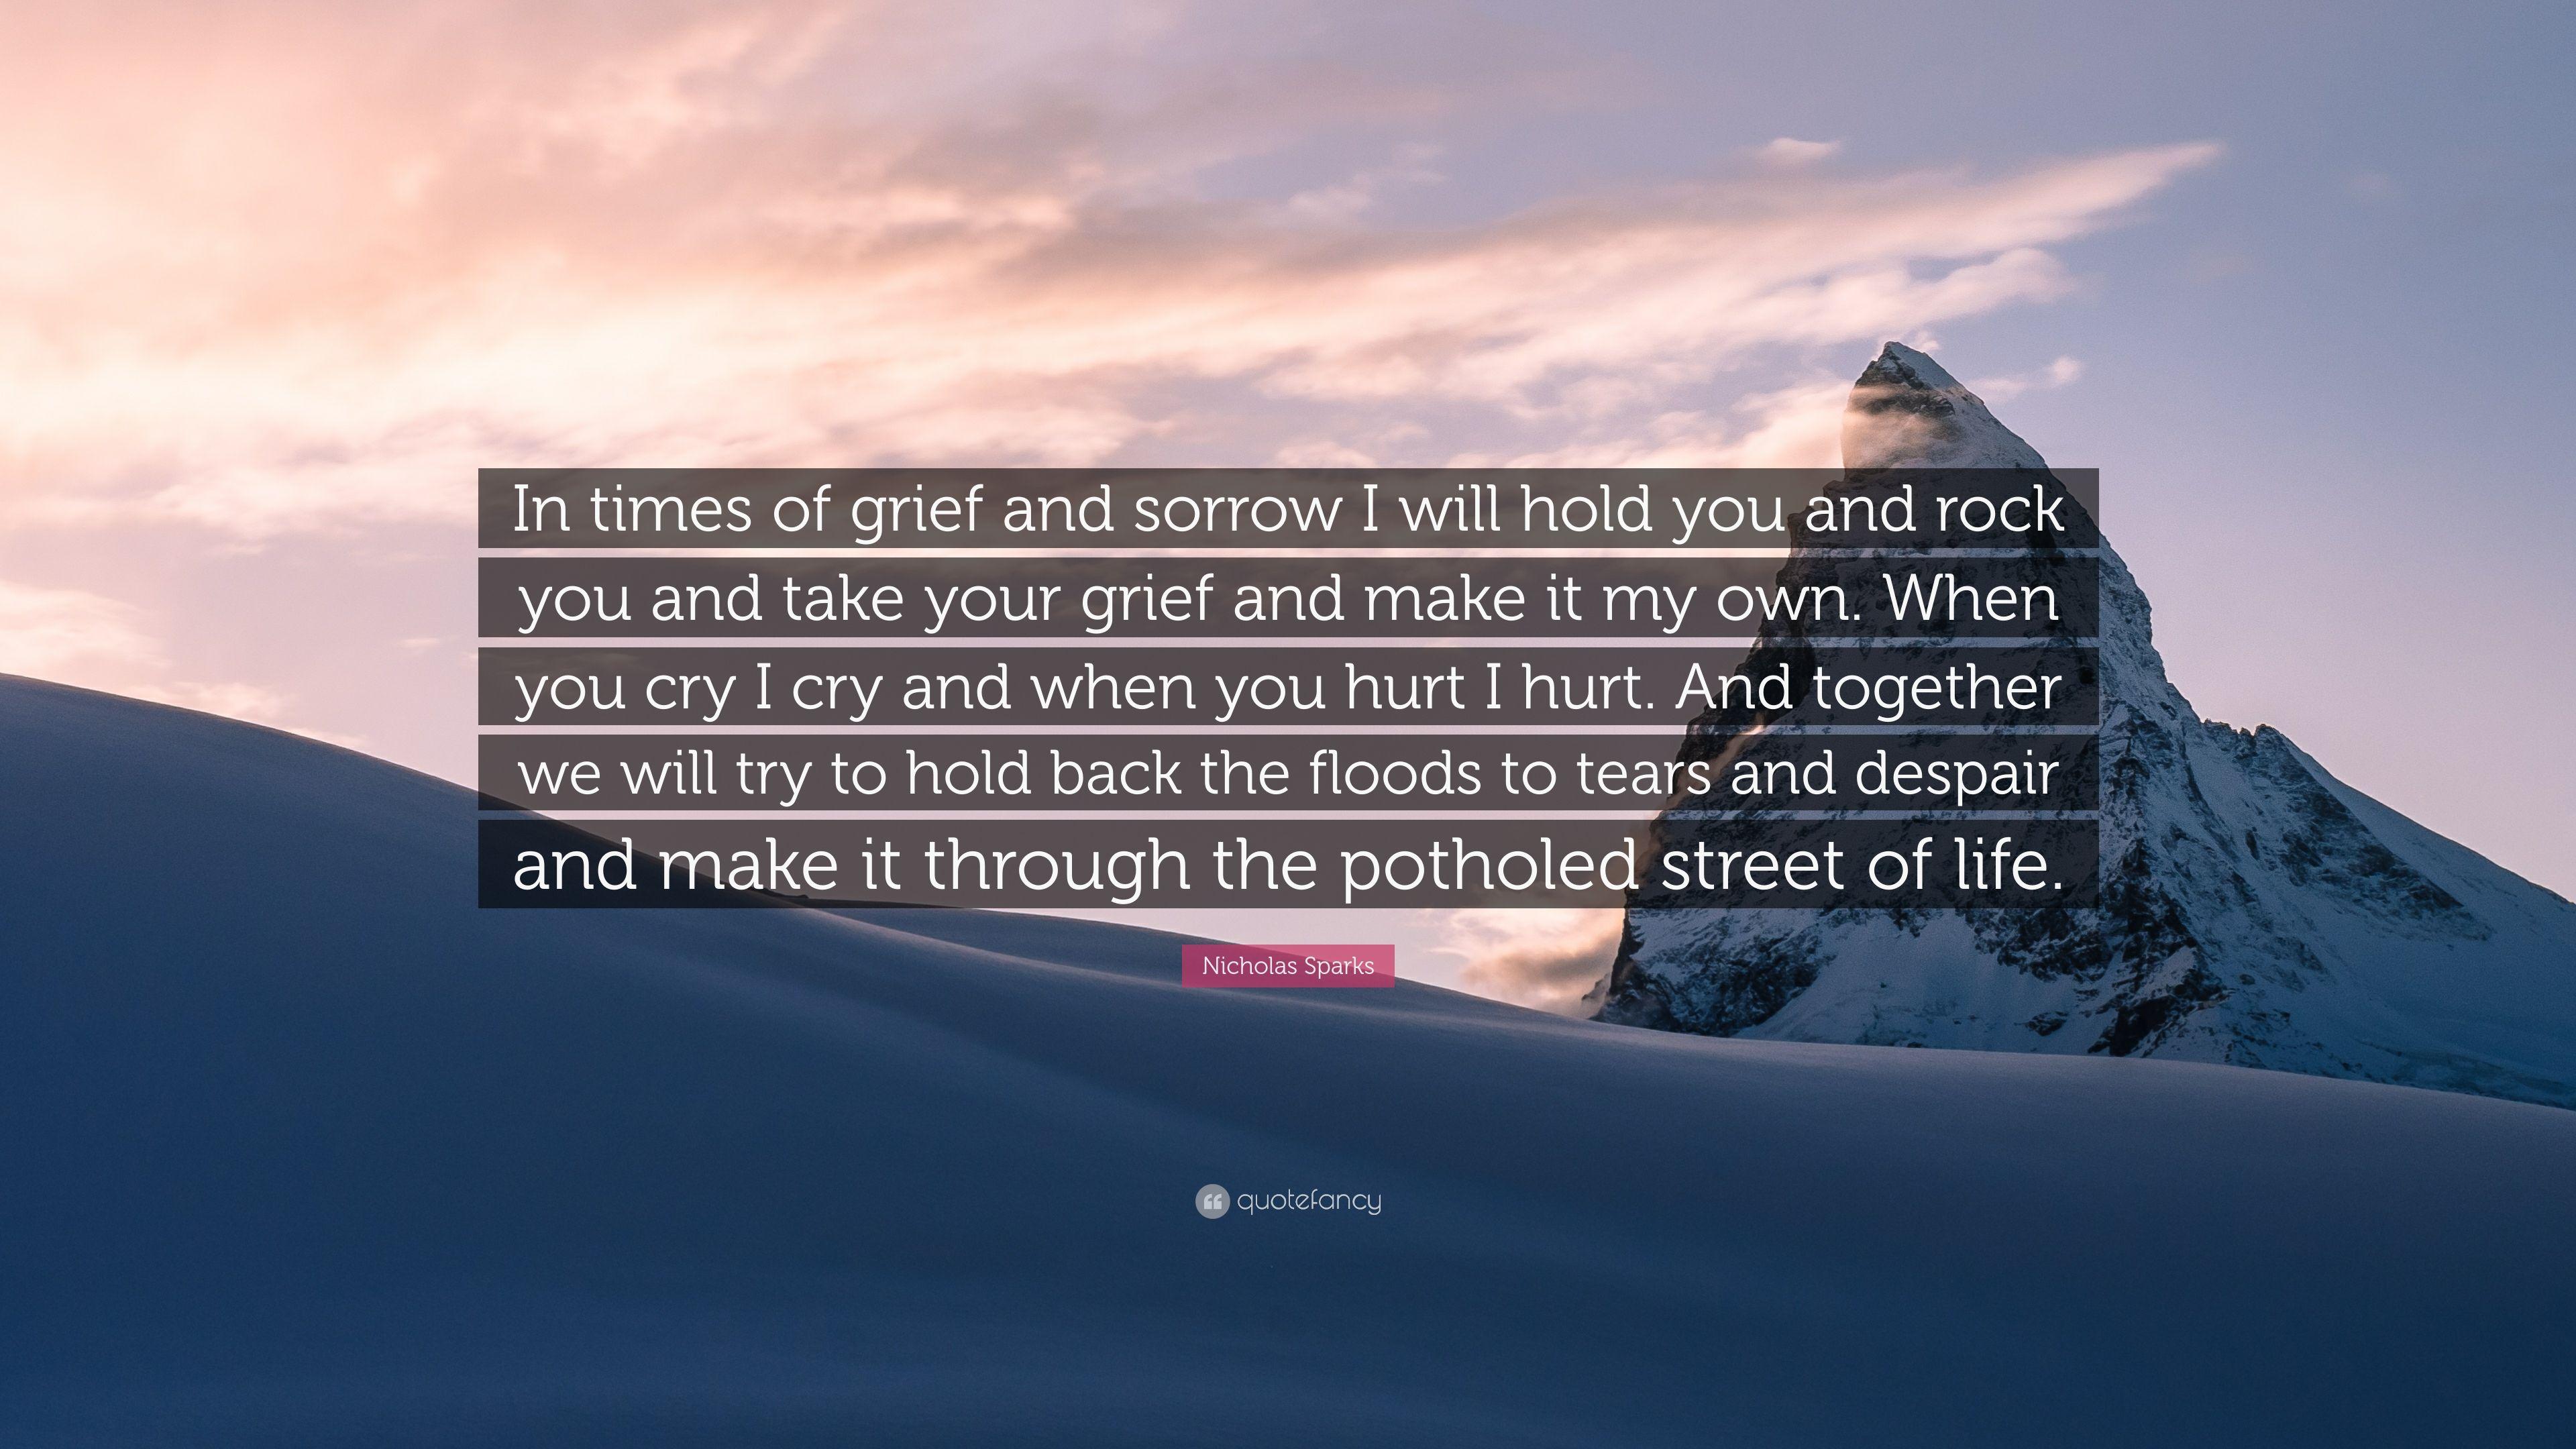 Nicholas Sparks Quote: “In times of grief and sorrow I will